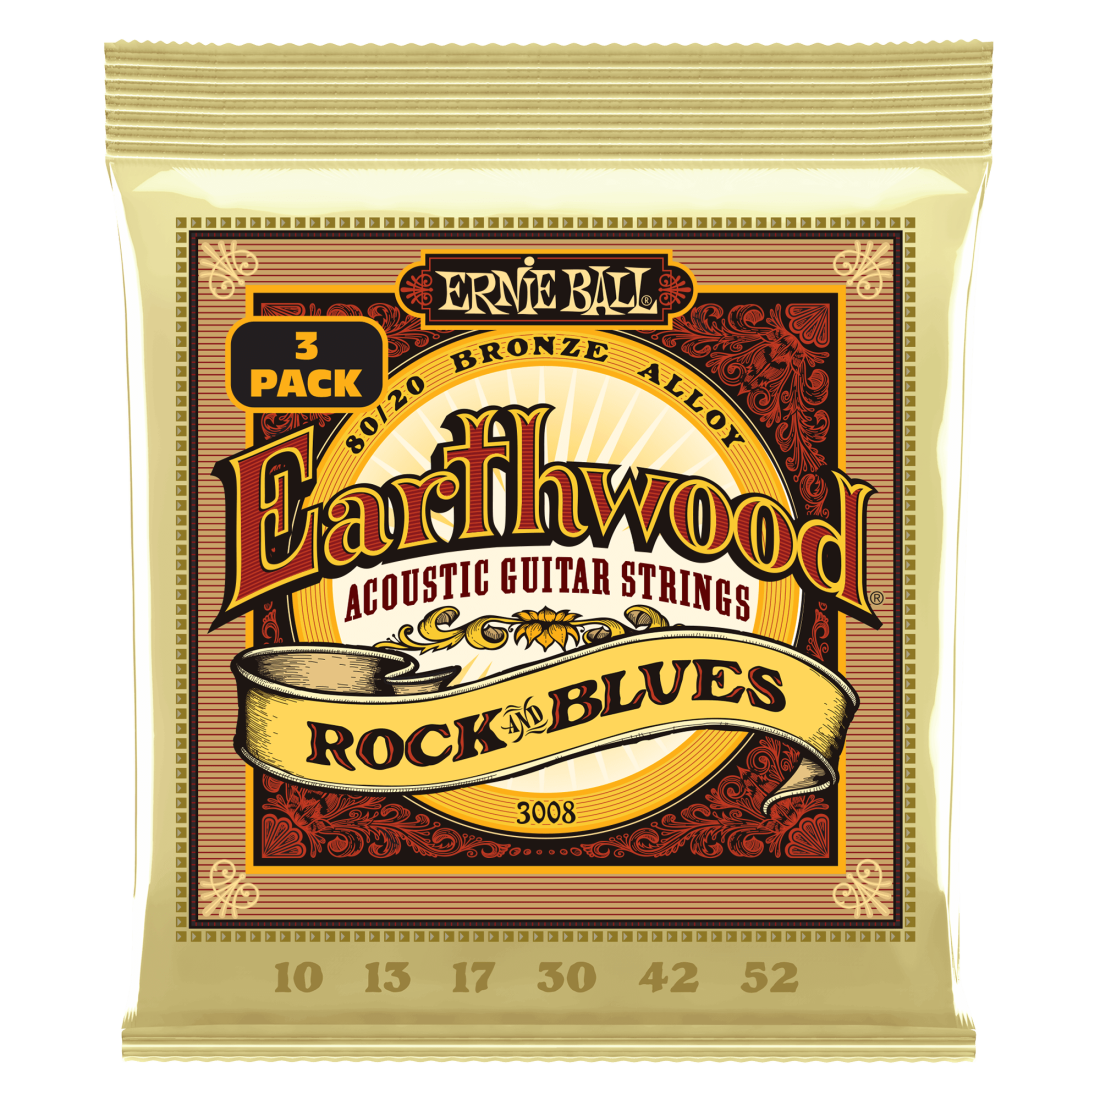 Earthwood Rock & Blues with Plain G 80/20 Acoustic Strings, 10-52 - 3 Pack